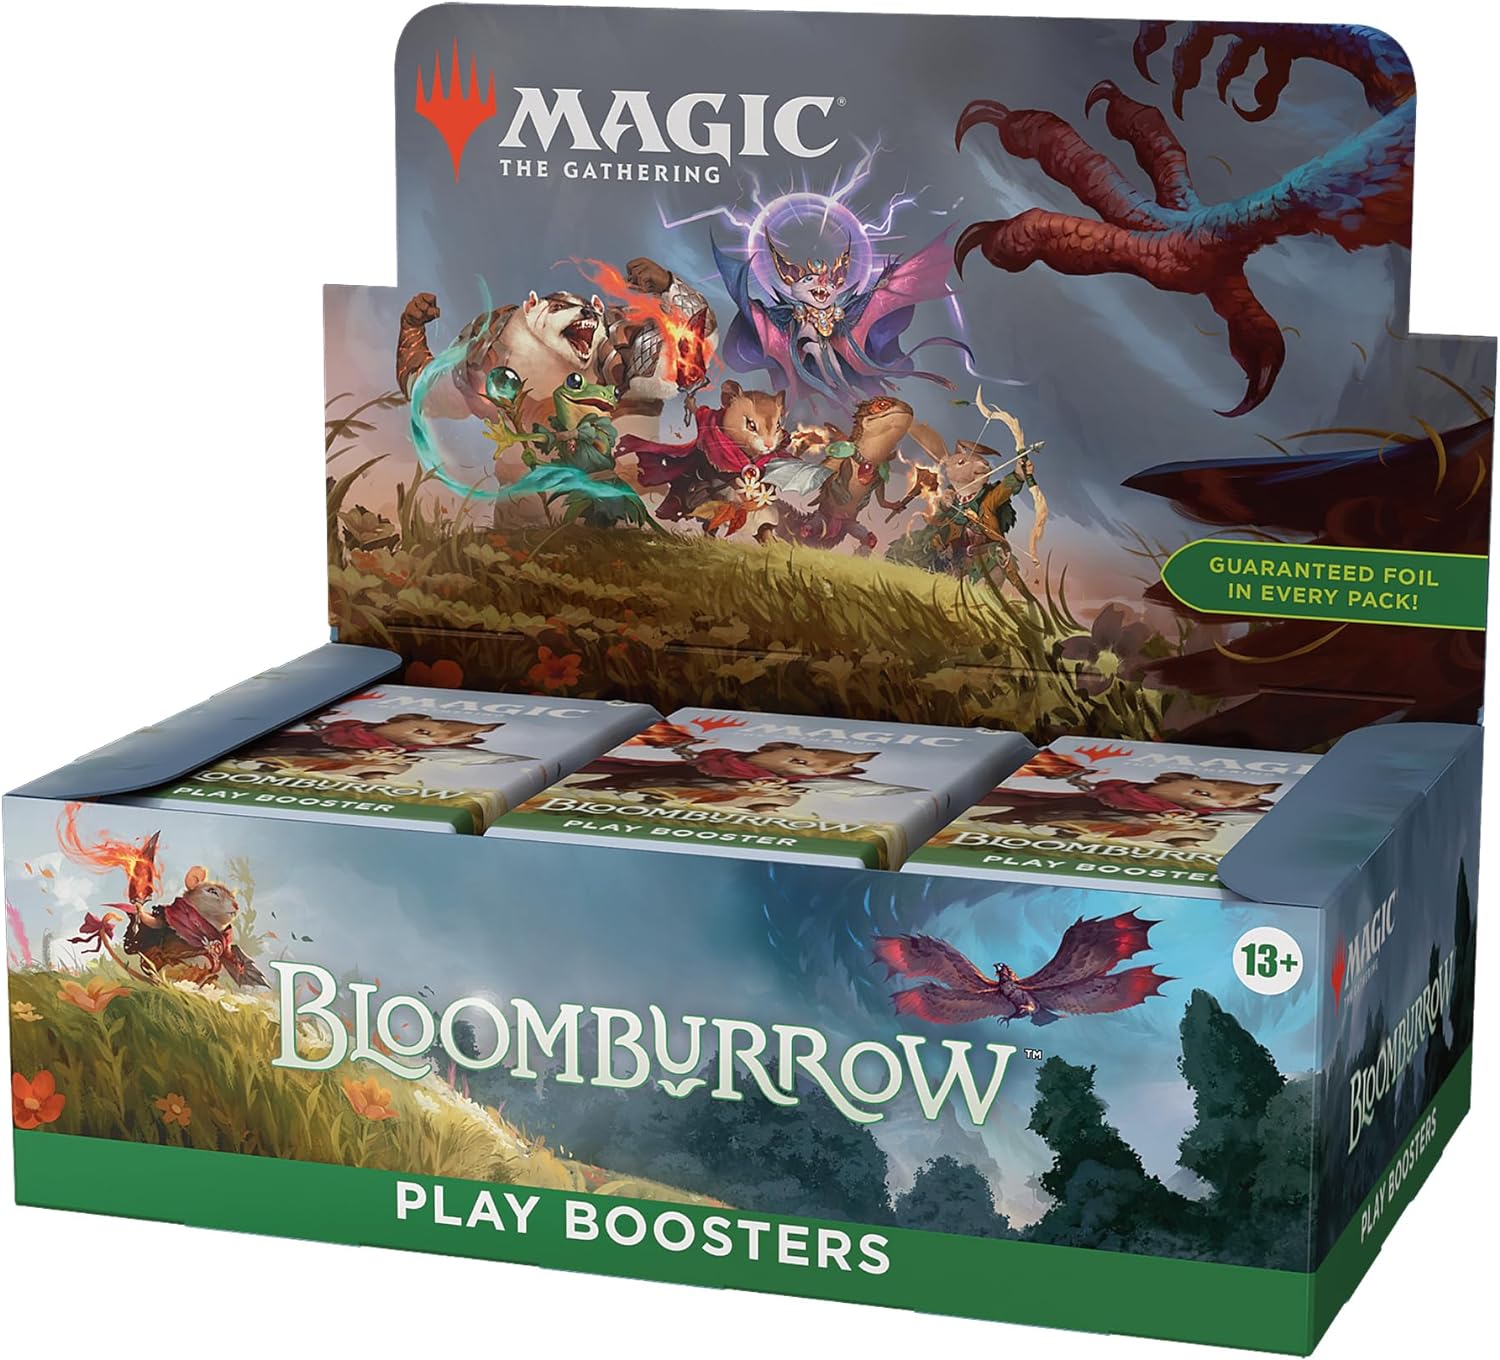 PRE-ORDER: Bloomburrow Play Booster Box - 36 Packs, Trading Cards made by Magic The Gathering. Exit 23 Games 